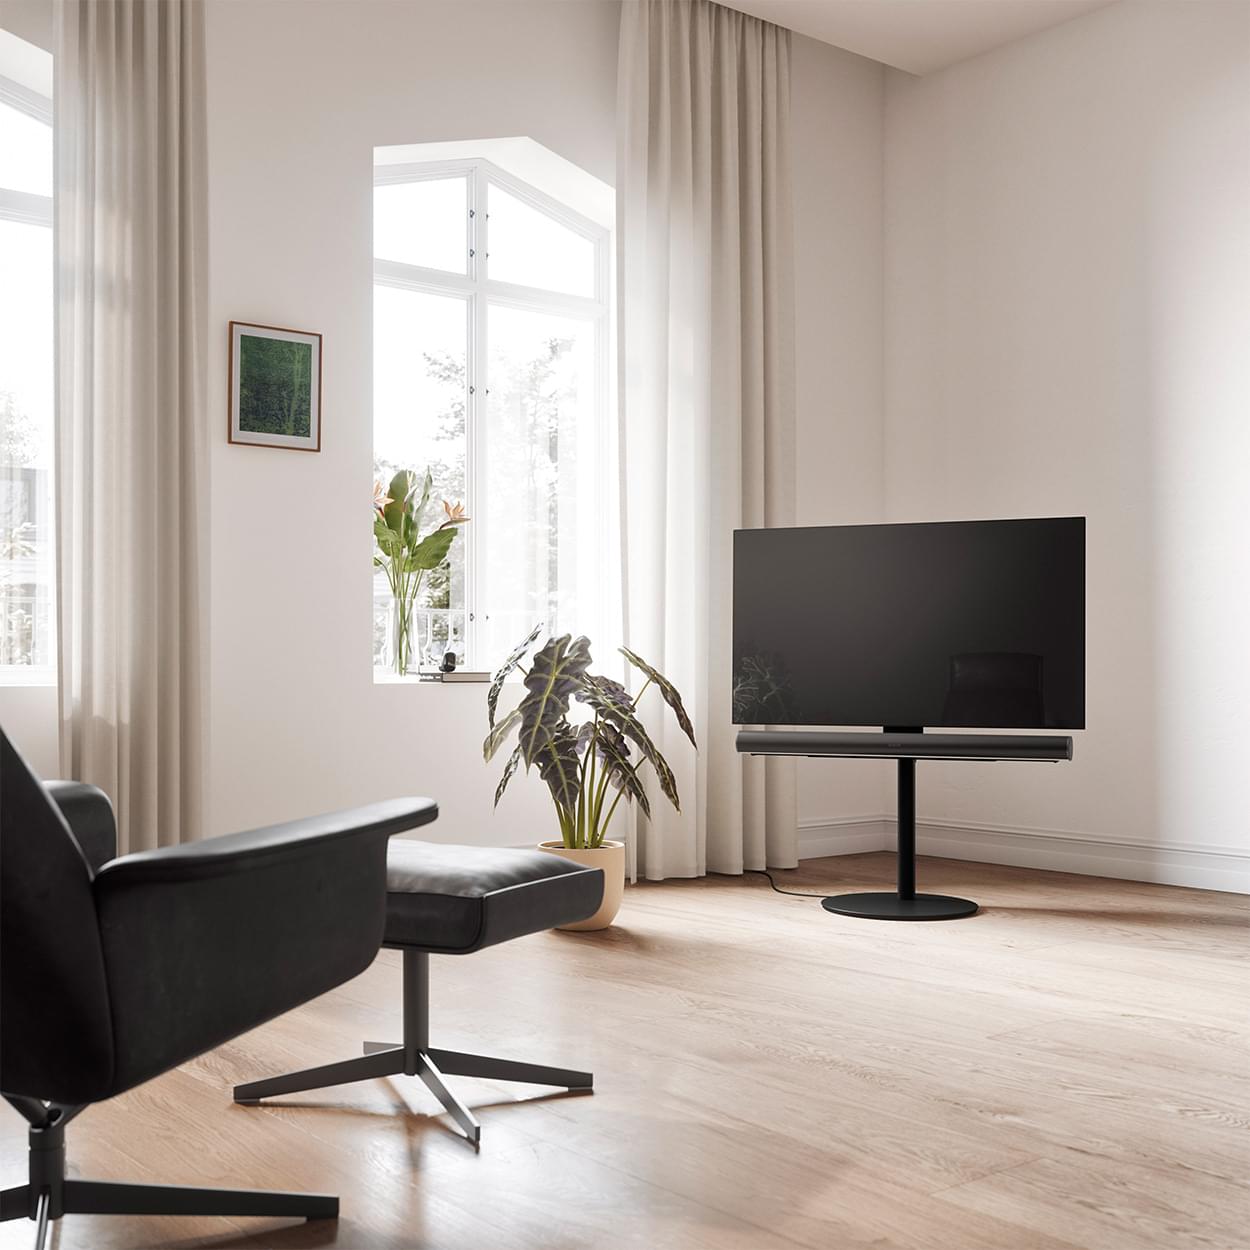 Spectral TV-Stands - Art - Circle - Tube - Tray - Floor - Spectral Audio  Möbel GmbH